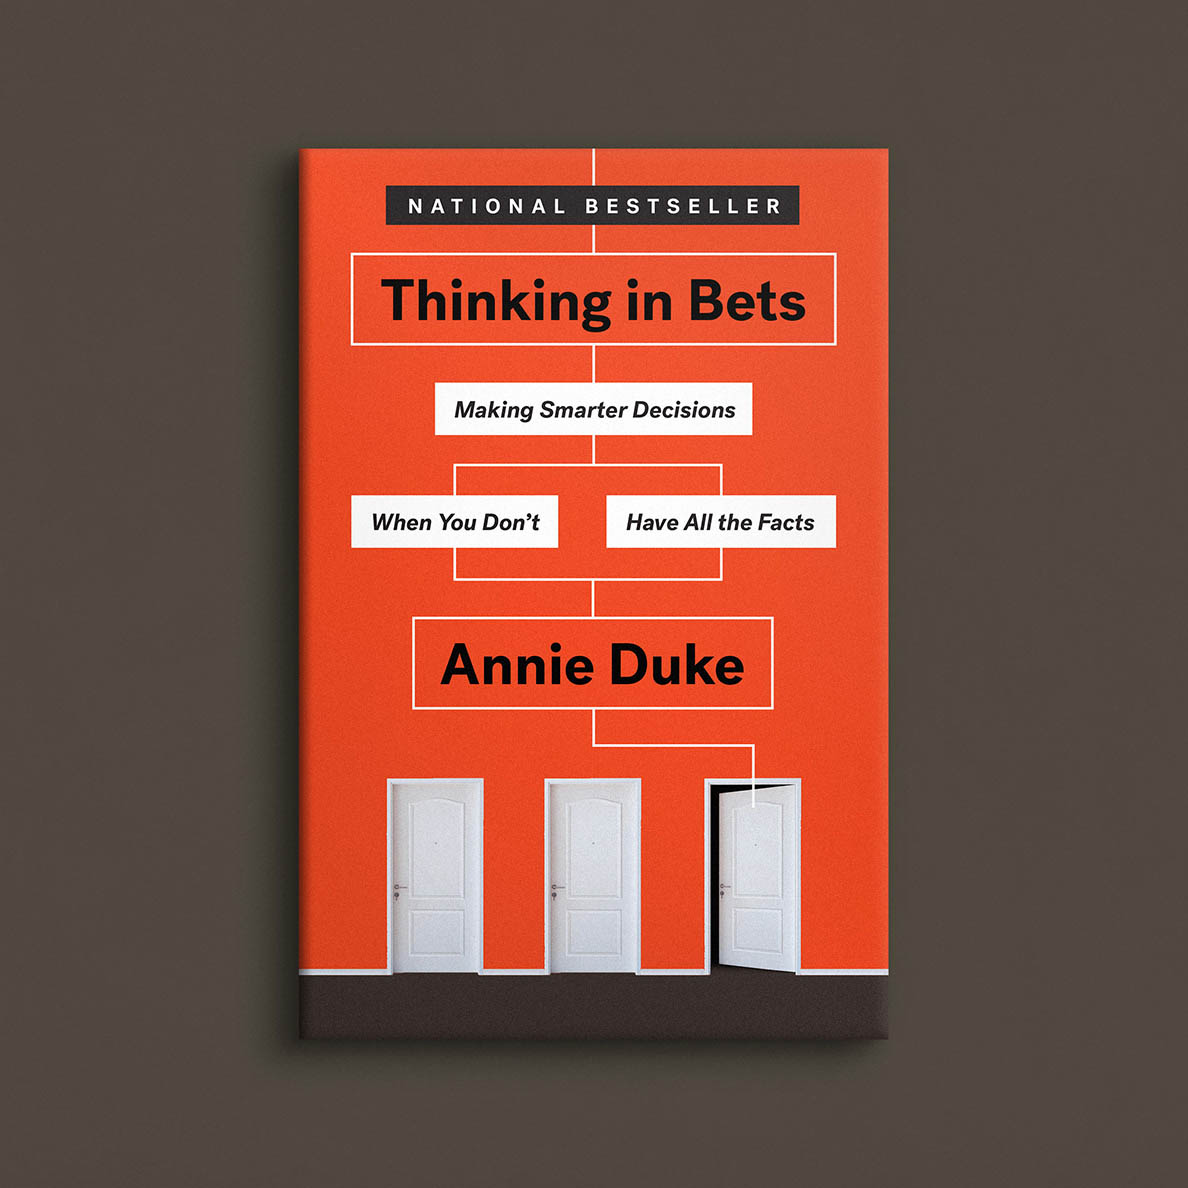 Thinking in Bets book cover